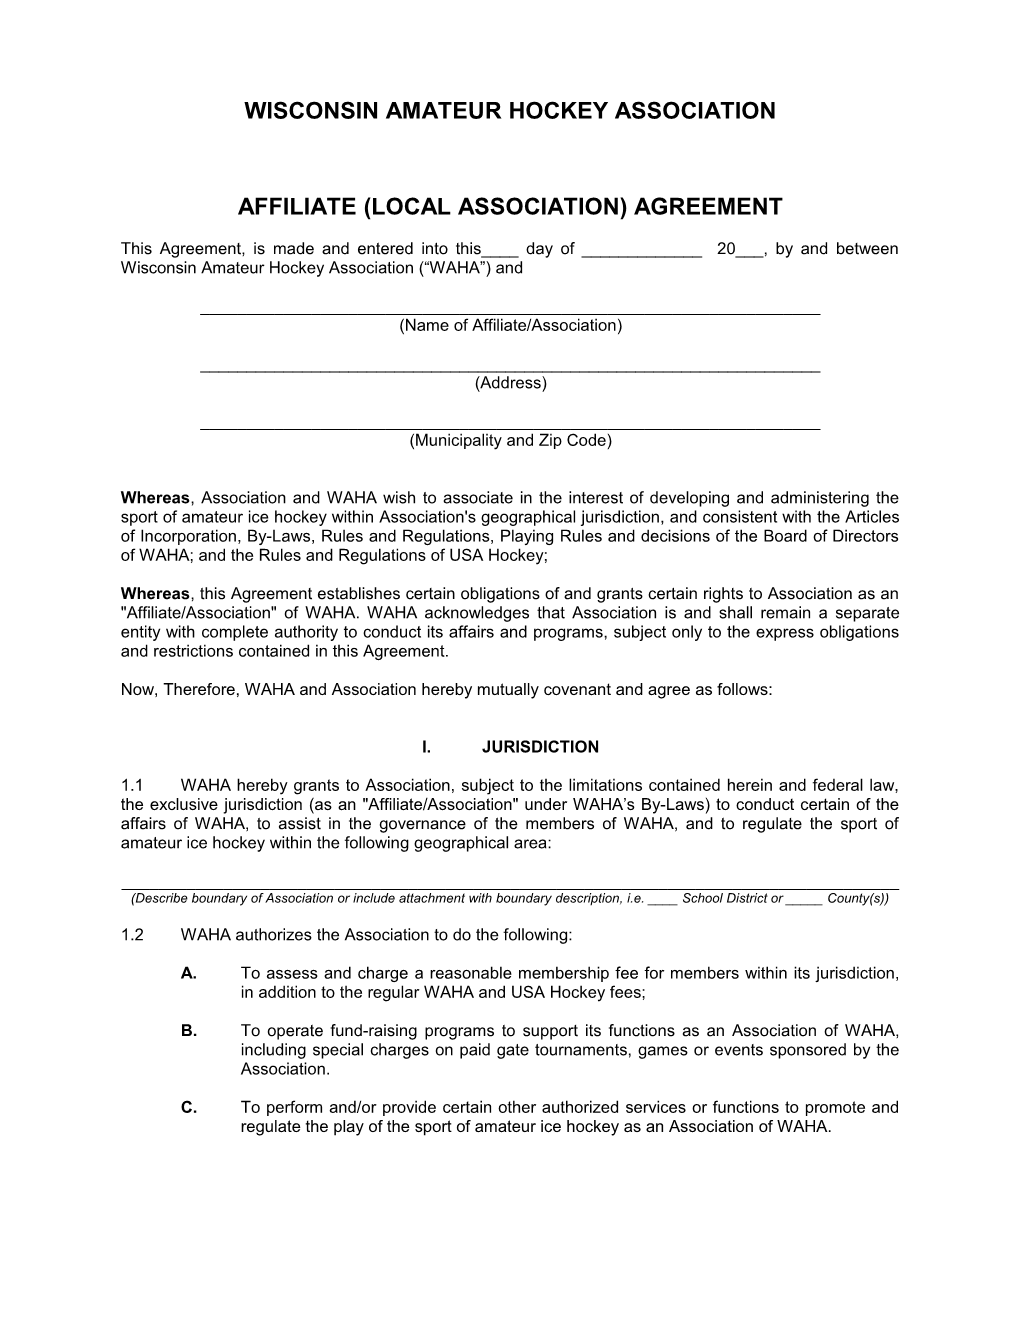 Affiliate (Local Association) Agreement with New Core Values (W0844617;1)